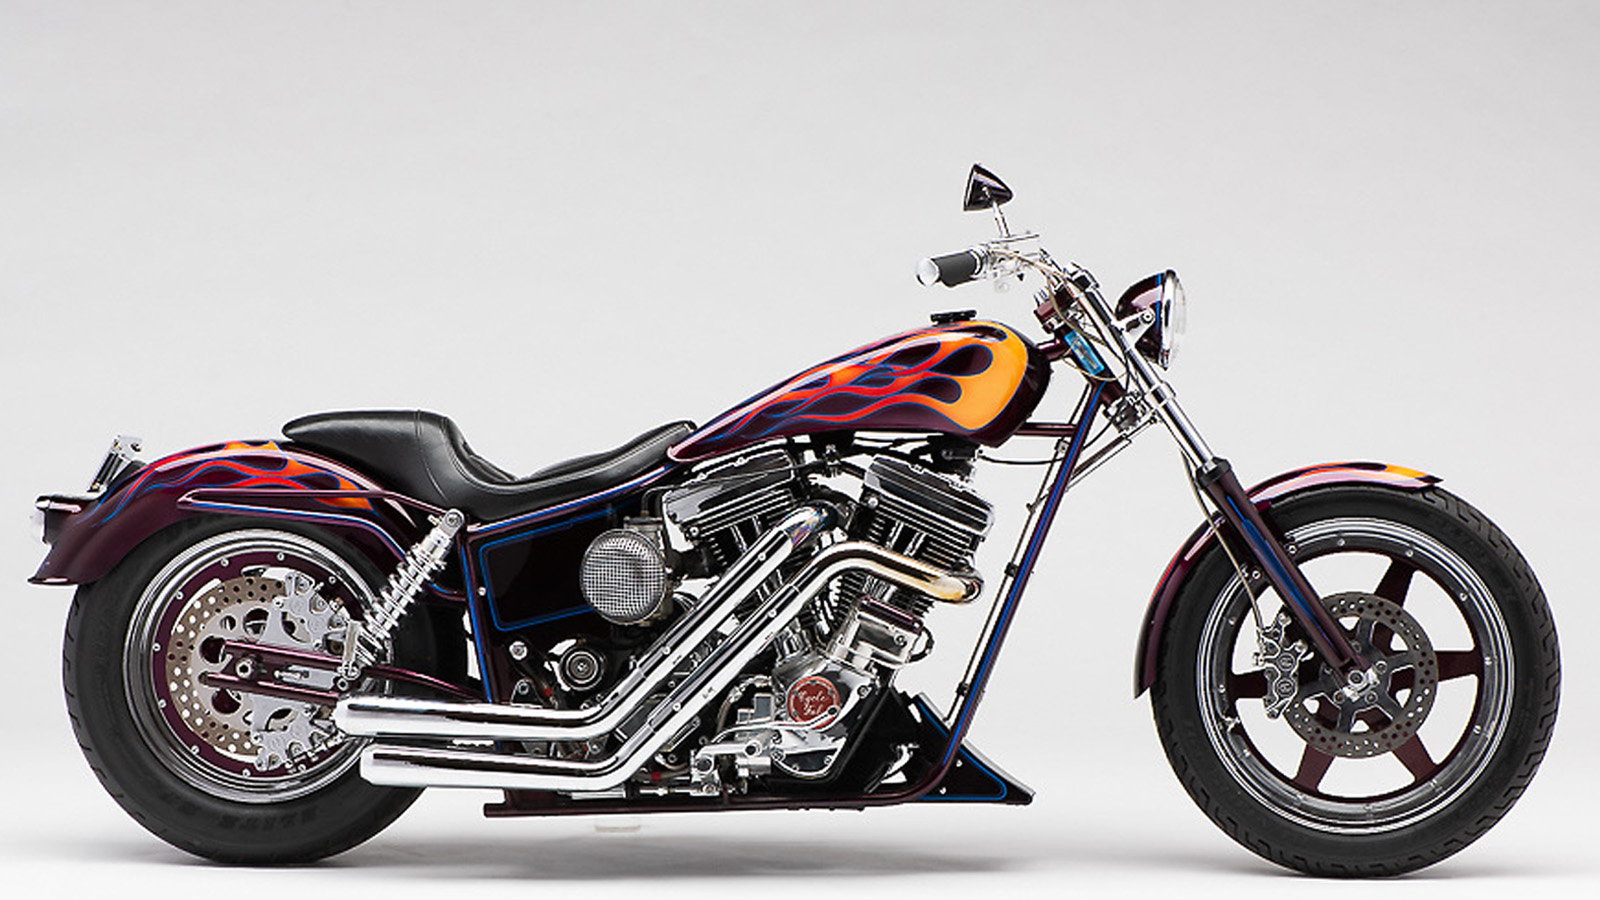 Customized Harley auctioned off in Minnesota to raise money for